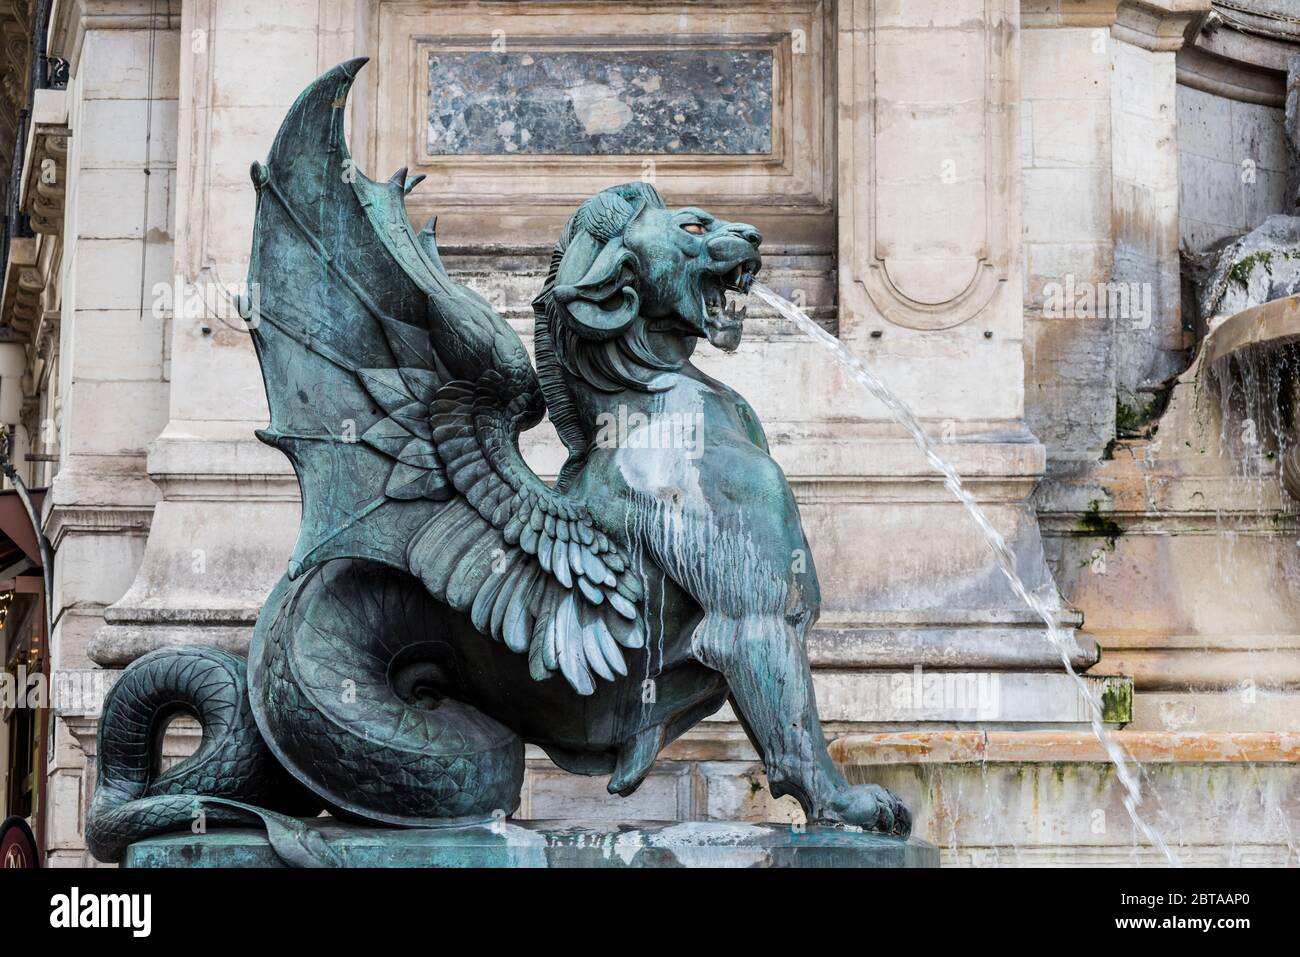 Fontaine Saint-Michel,  by the architect Gabriel Davioud, a monumental fountain located in Place Saint-Michel in the 6th arrondissement in Paris, Fran Stock Photo